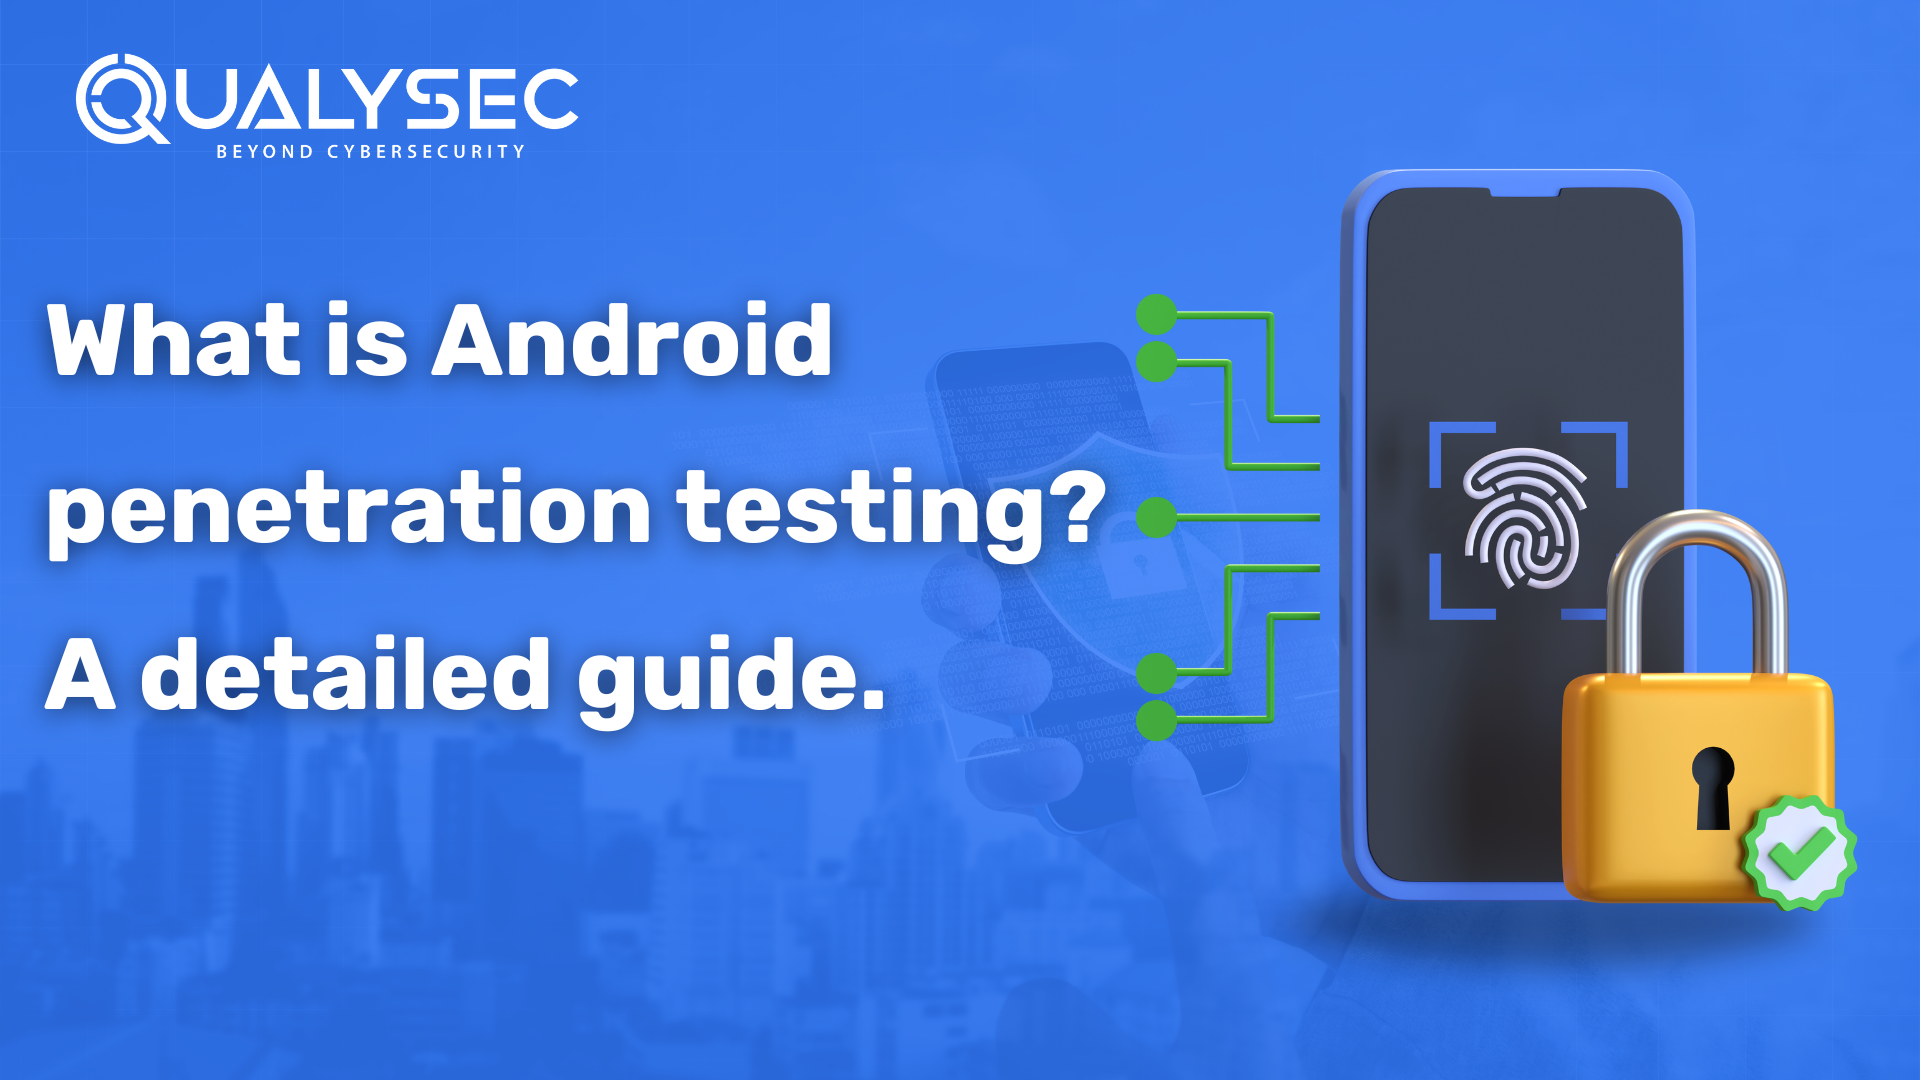 Android penetration testing